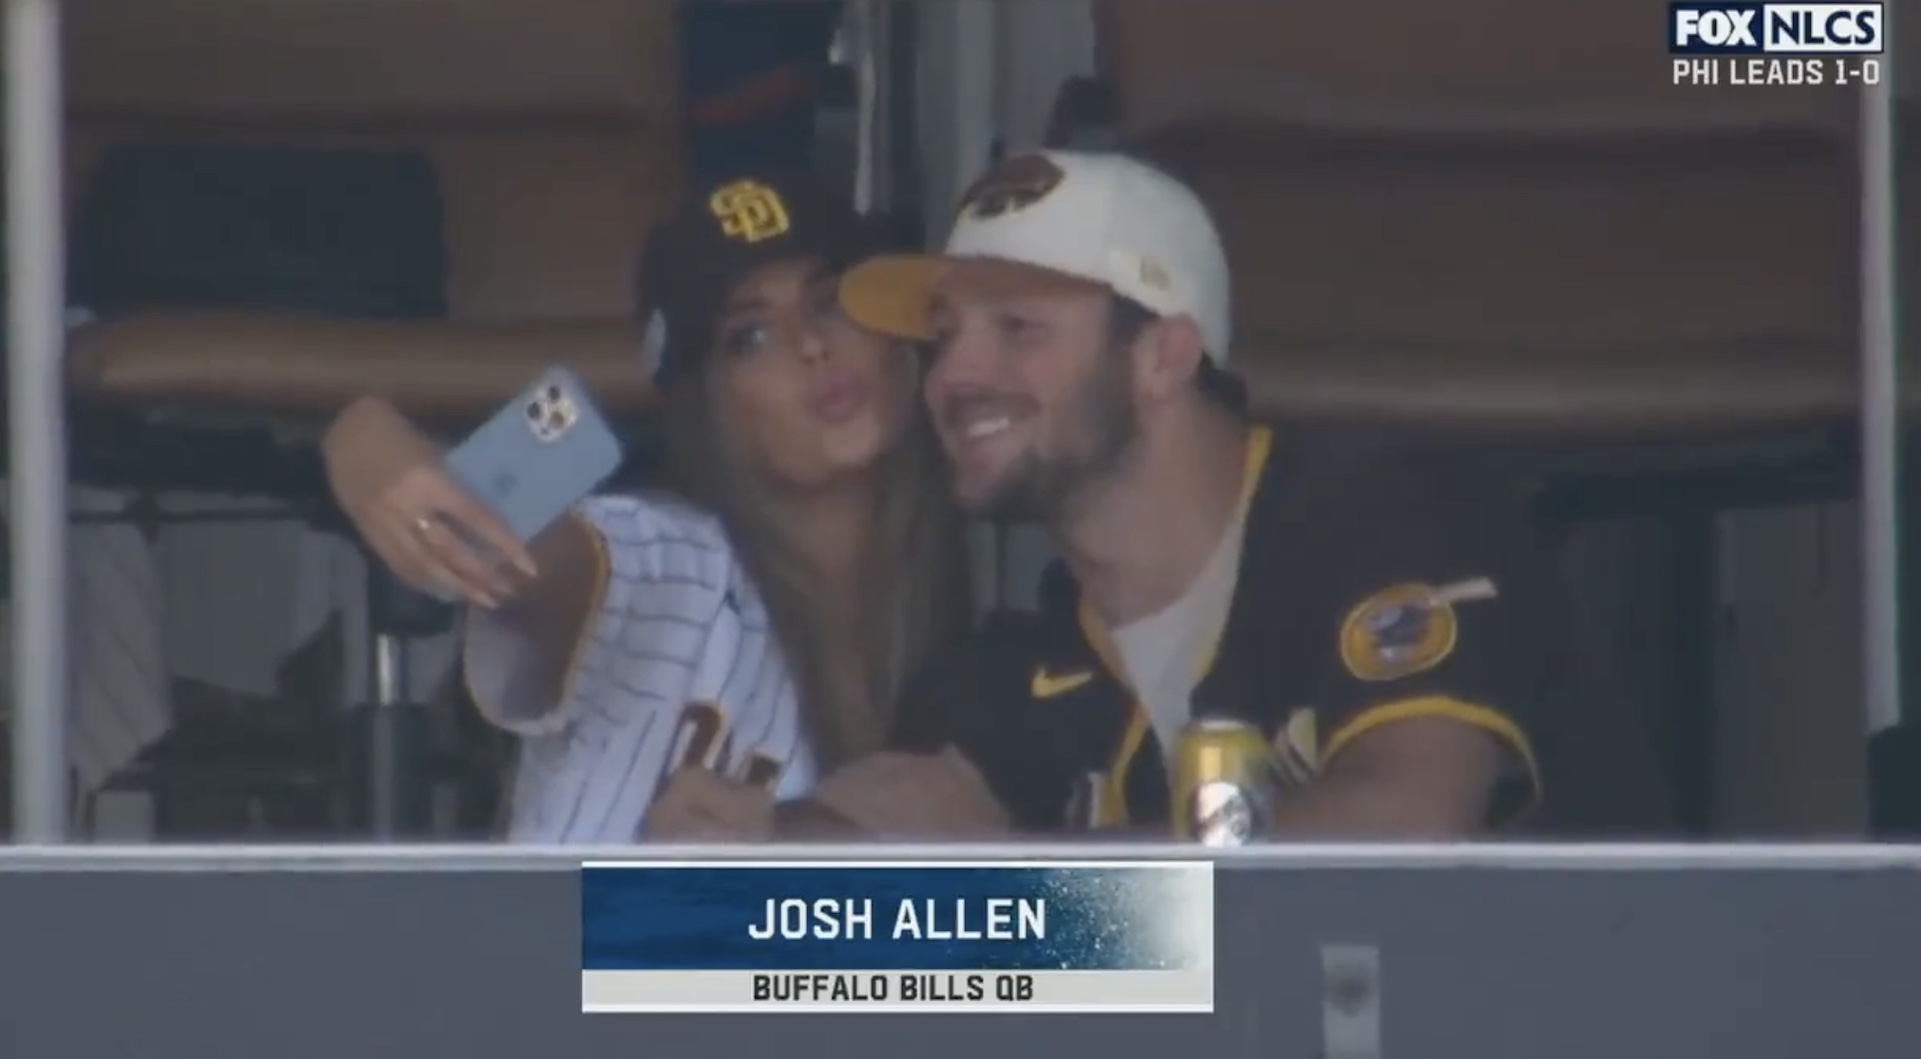 Josh Allen and Brittany Williams' selfie interrupted by Fox at NLCS